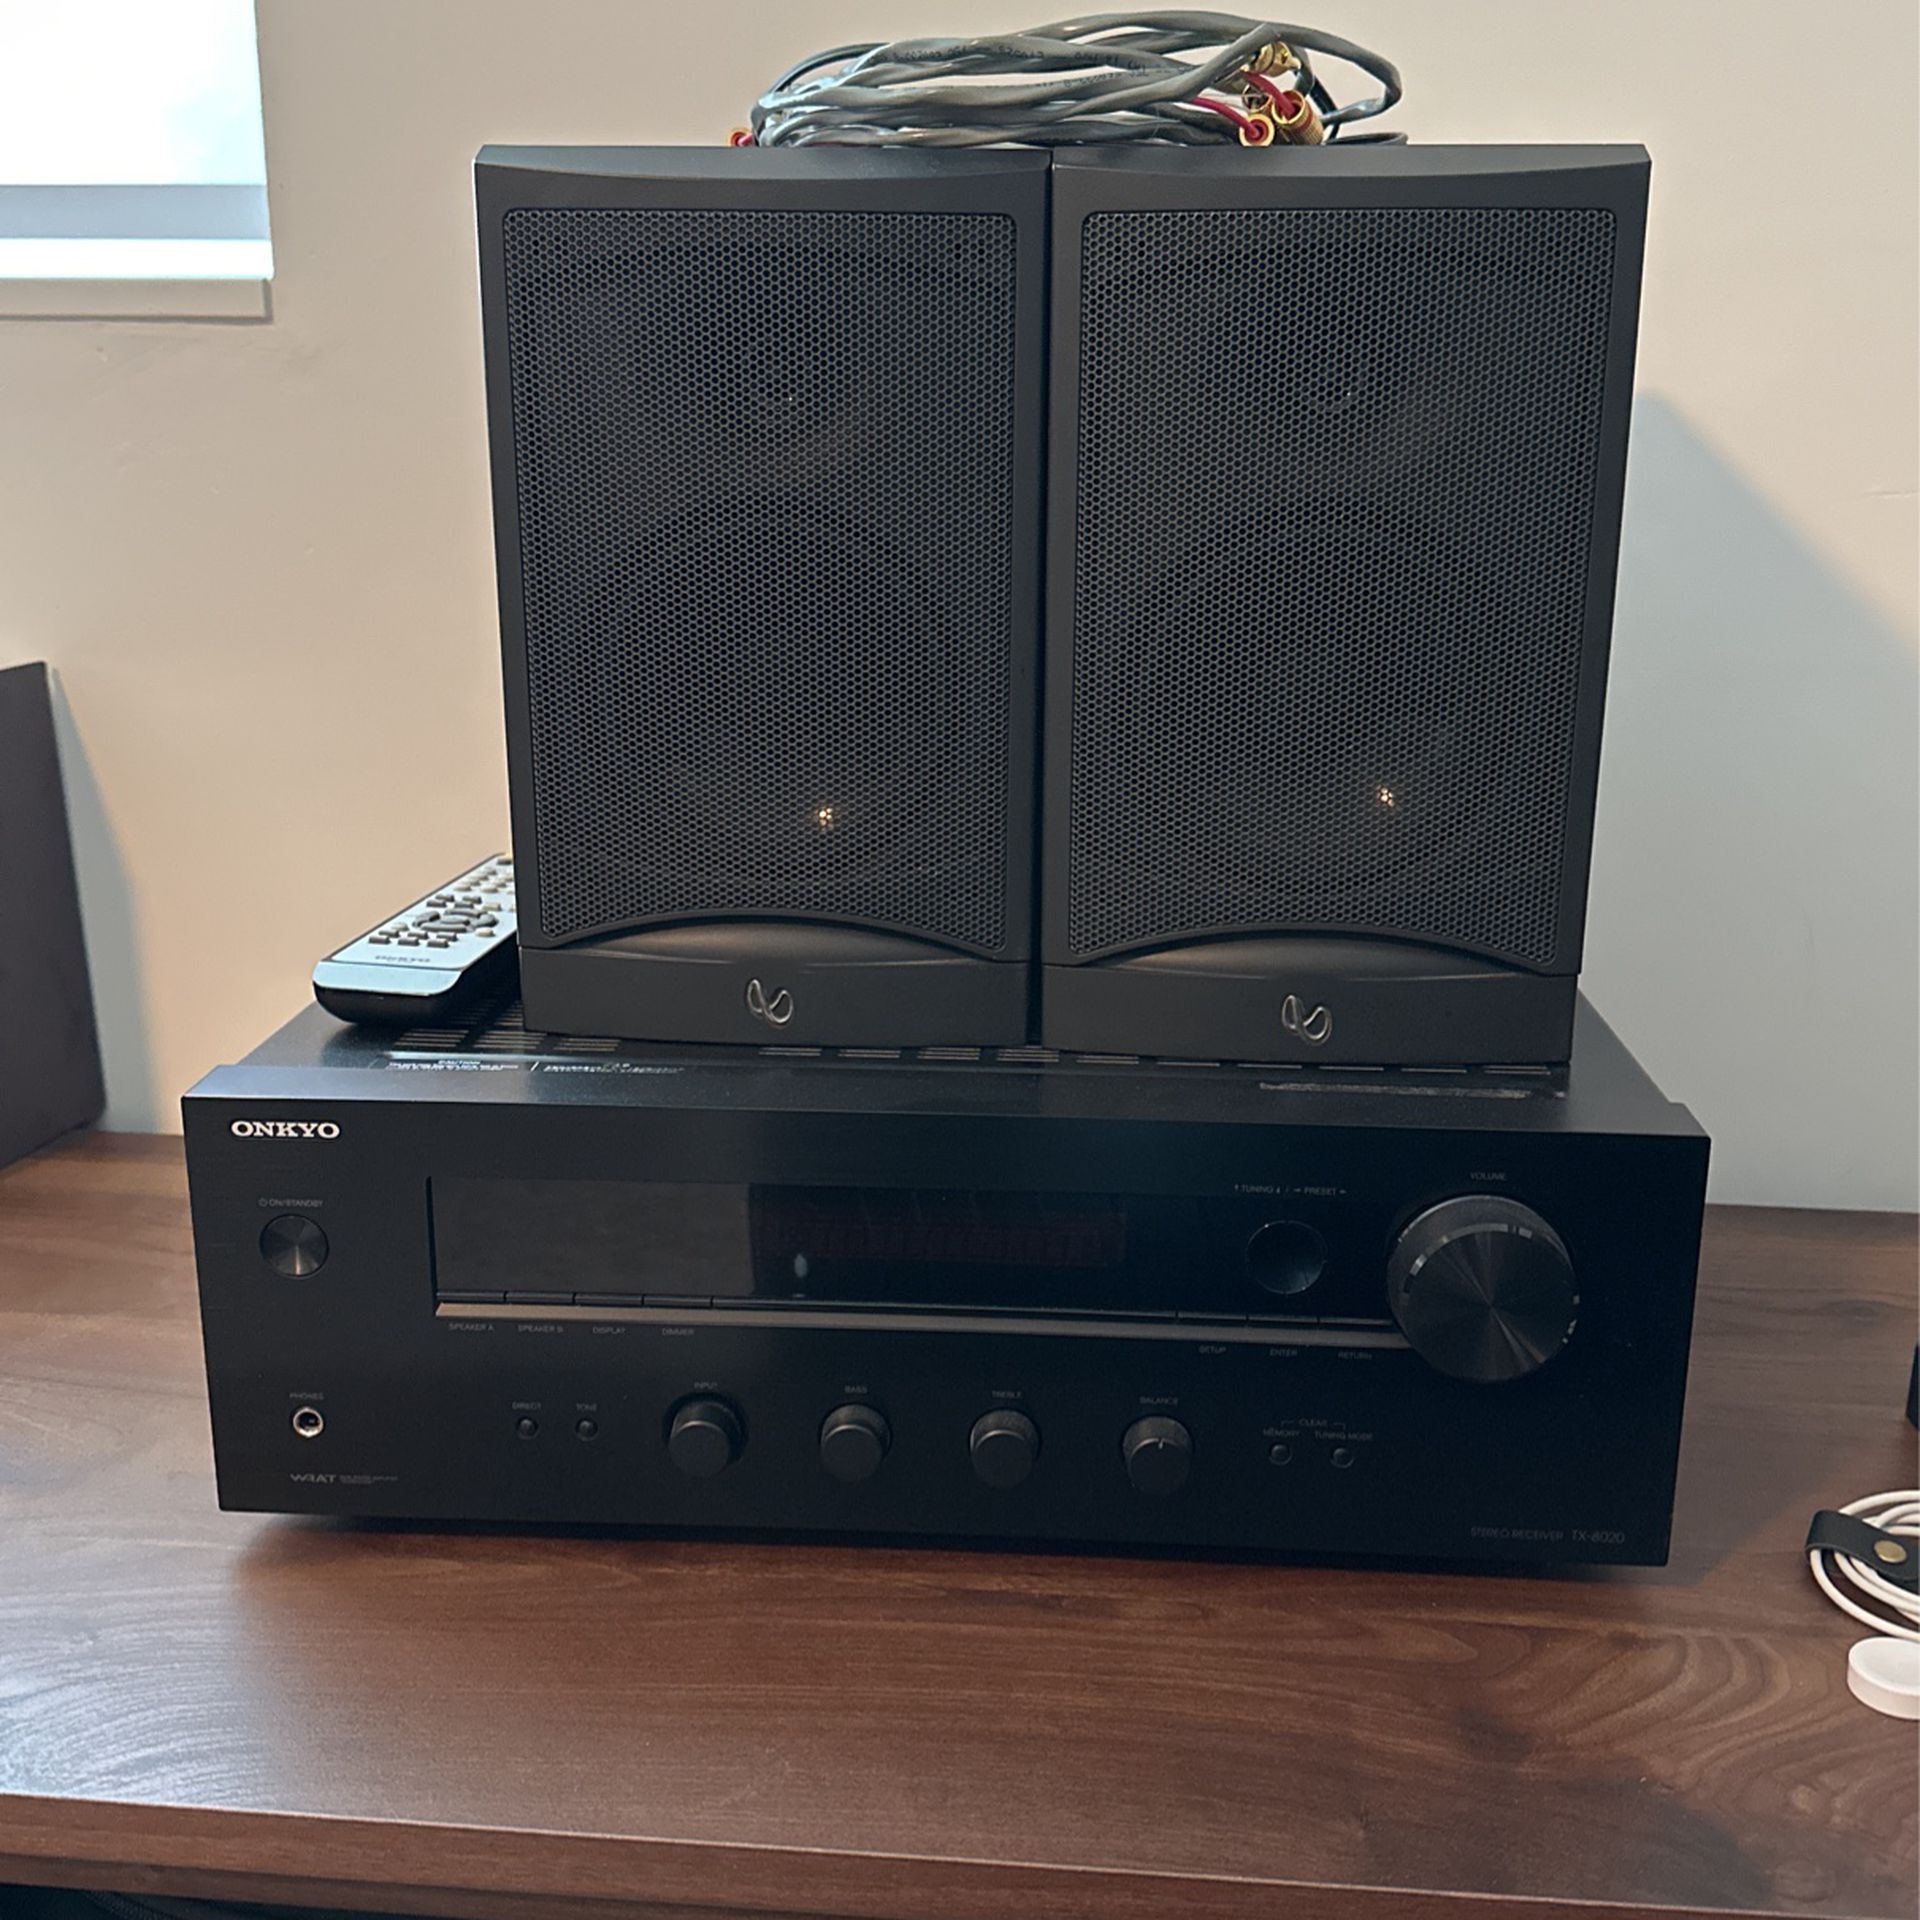 Onkyo Receiver, Two Speakers Plus Speaker Wires, And Remote